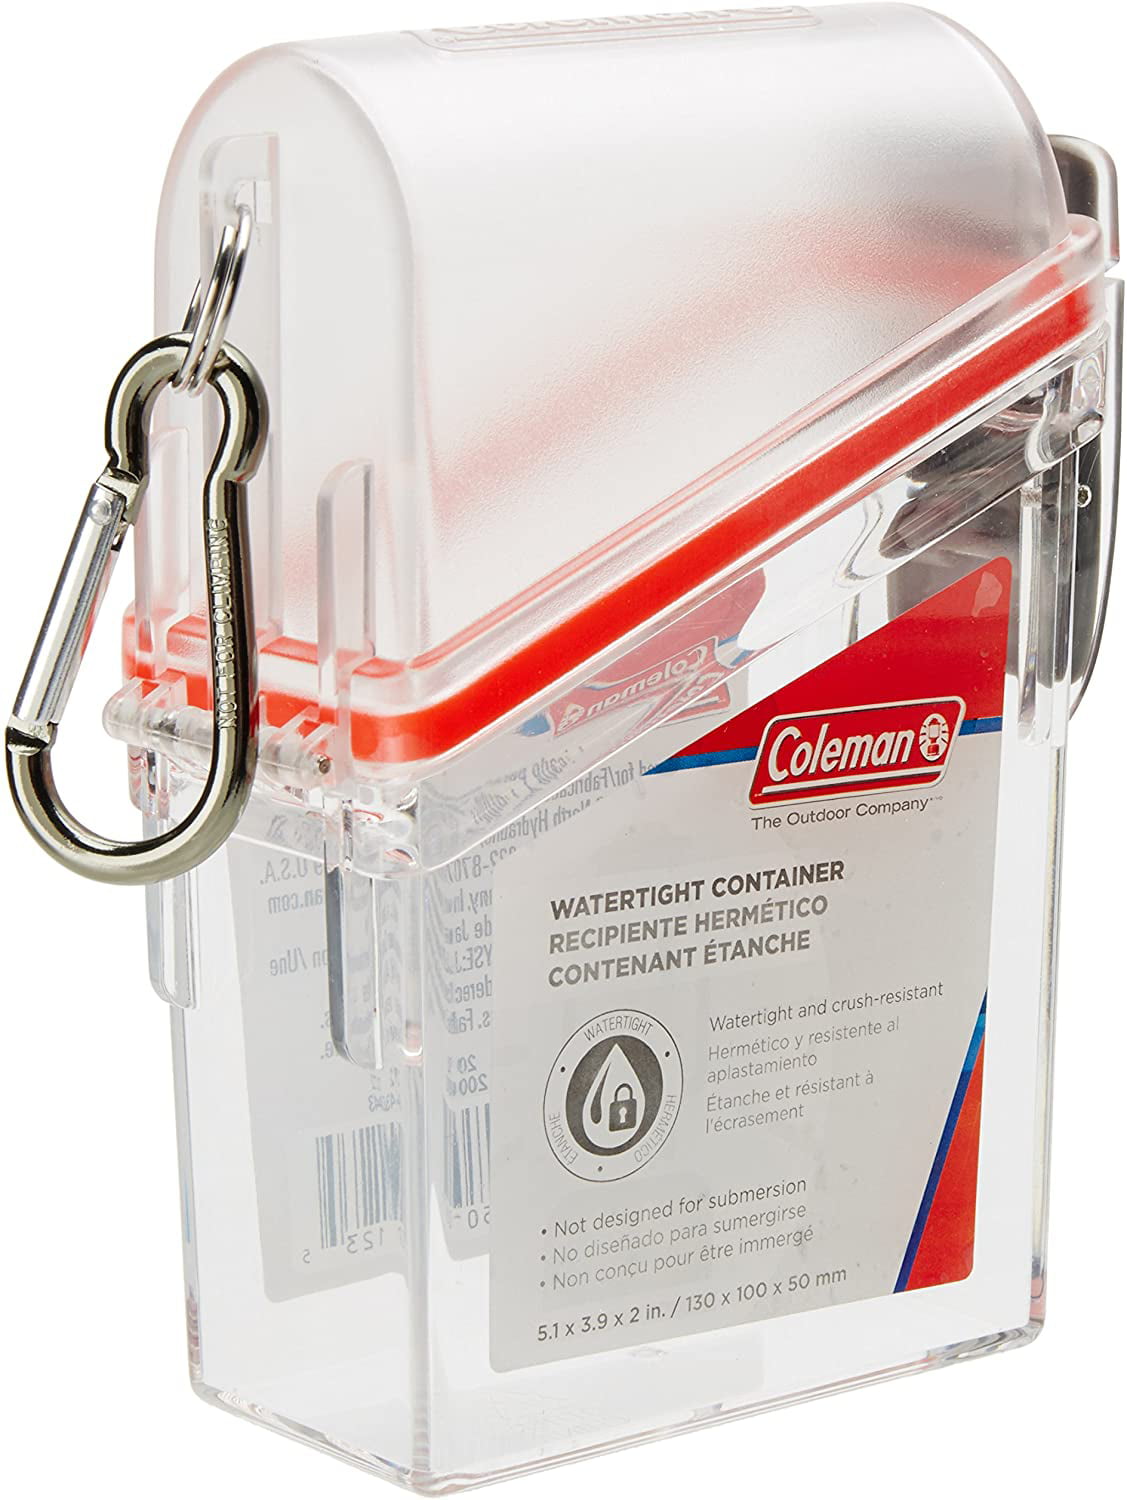 Coleman Watertight Plastic Container, Small, Good for Documents, Phones,  Matches, etc.